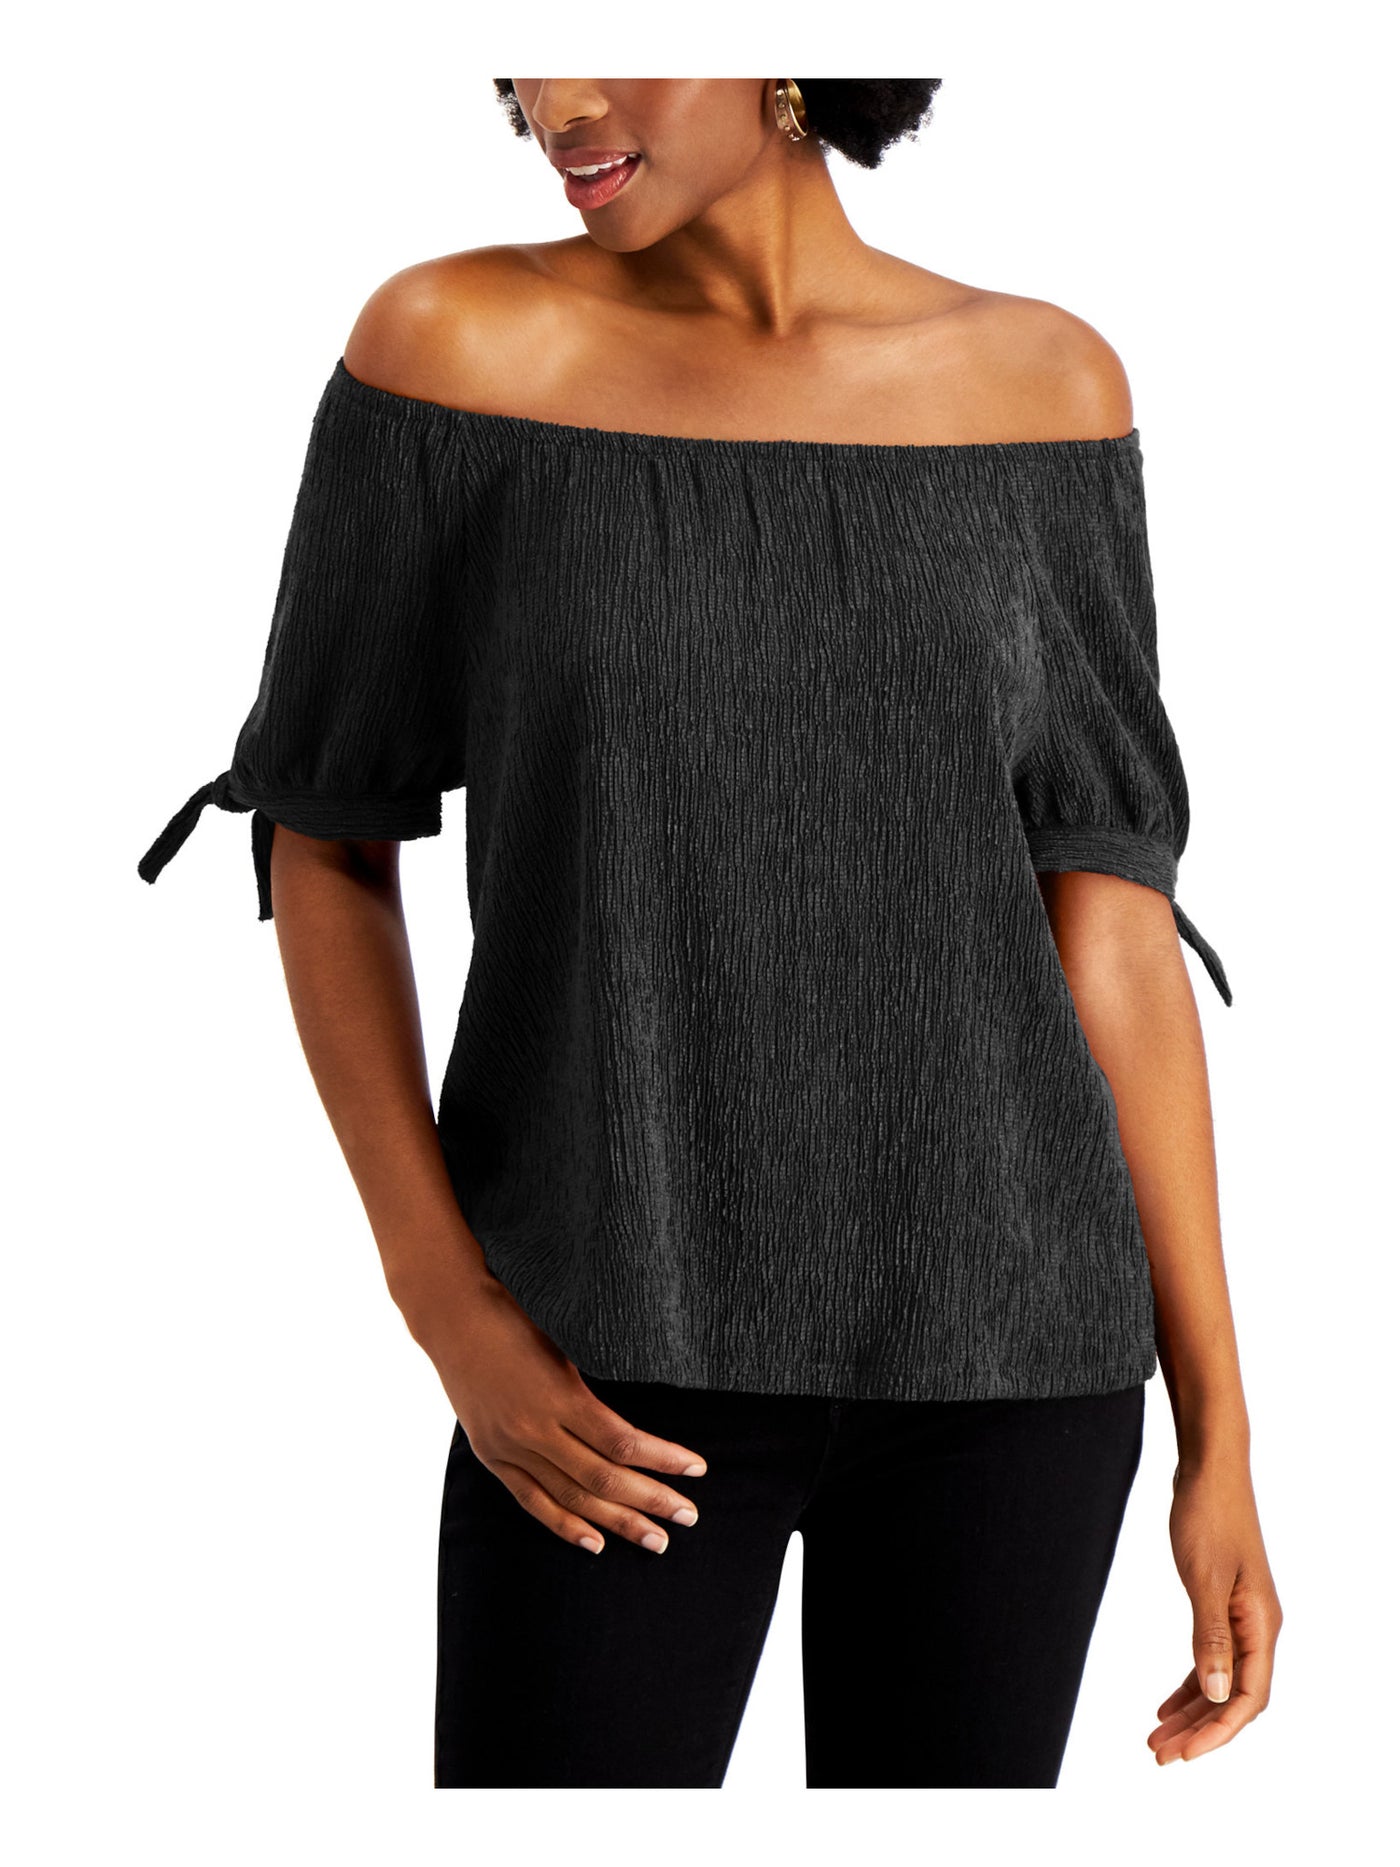 STYLE & COMPANY Womens Black Textured Tie Short Sleeve Off Shoulder Party Top S